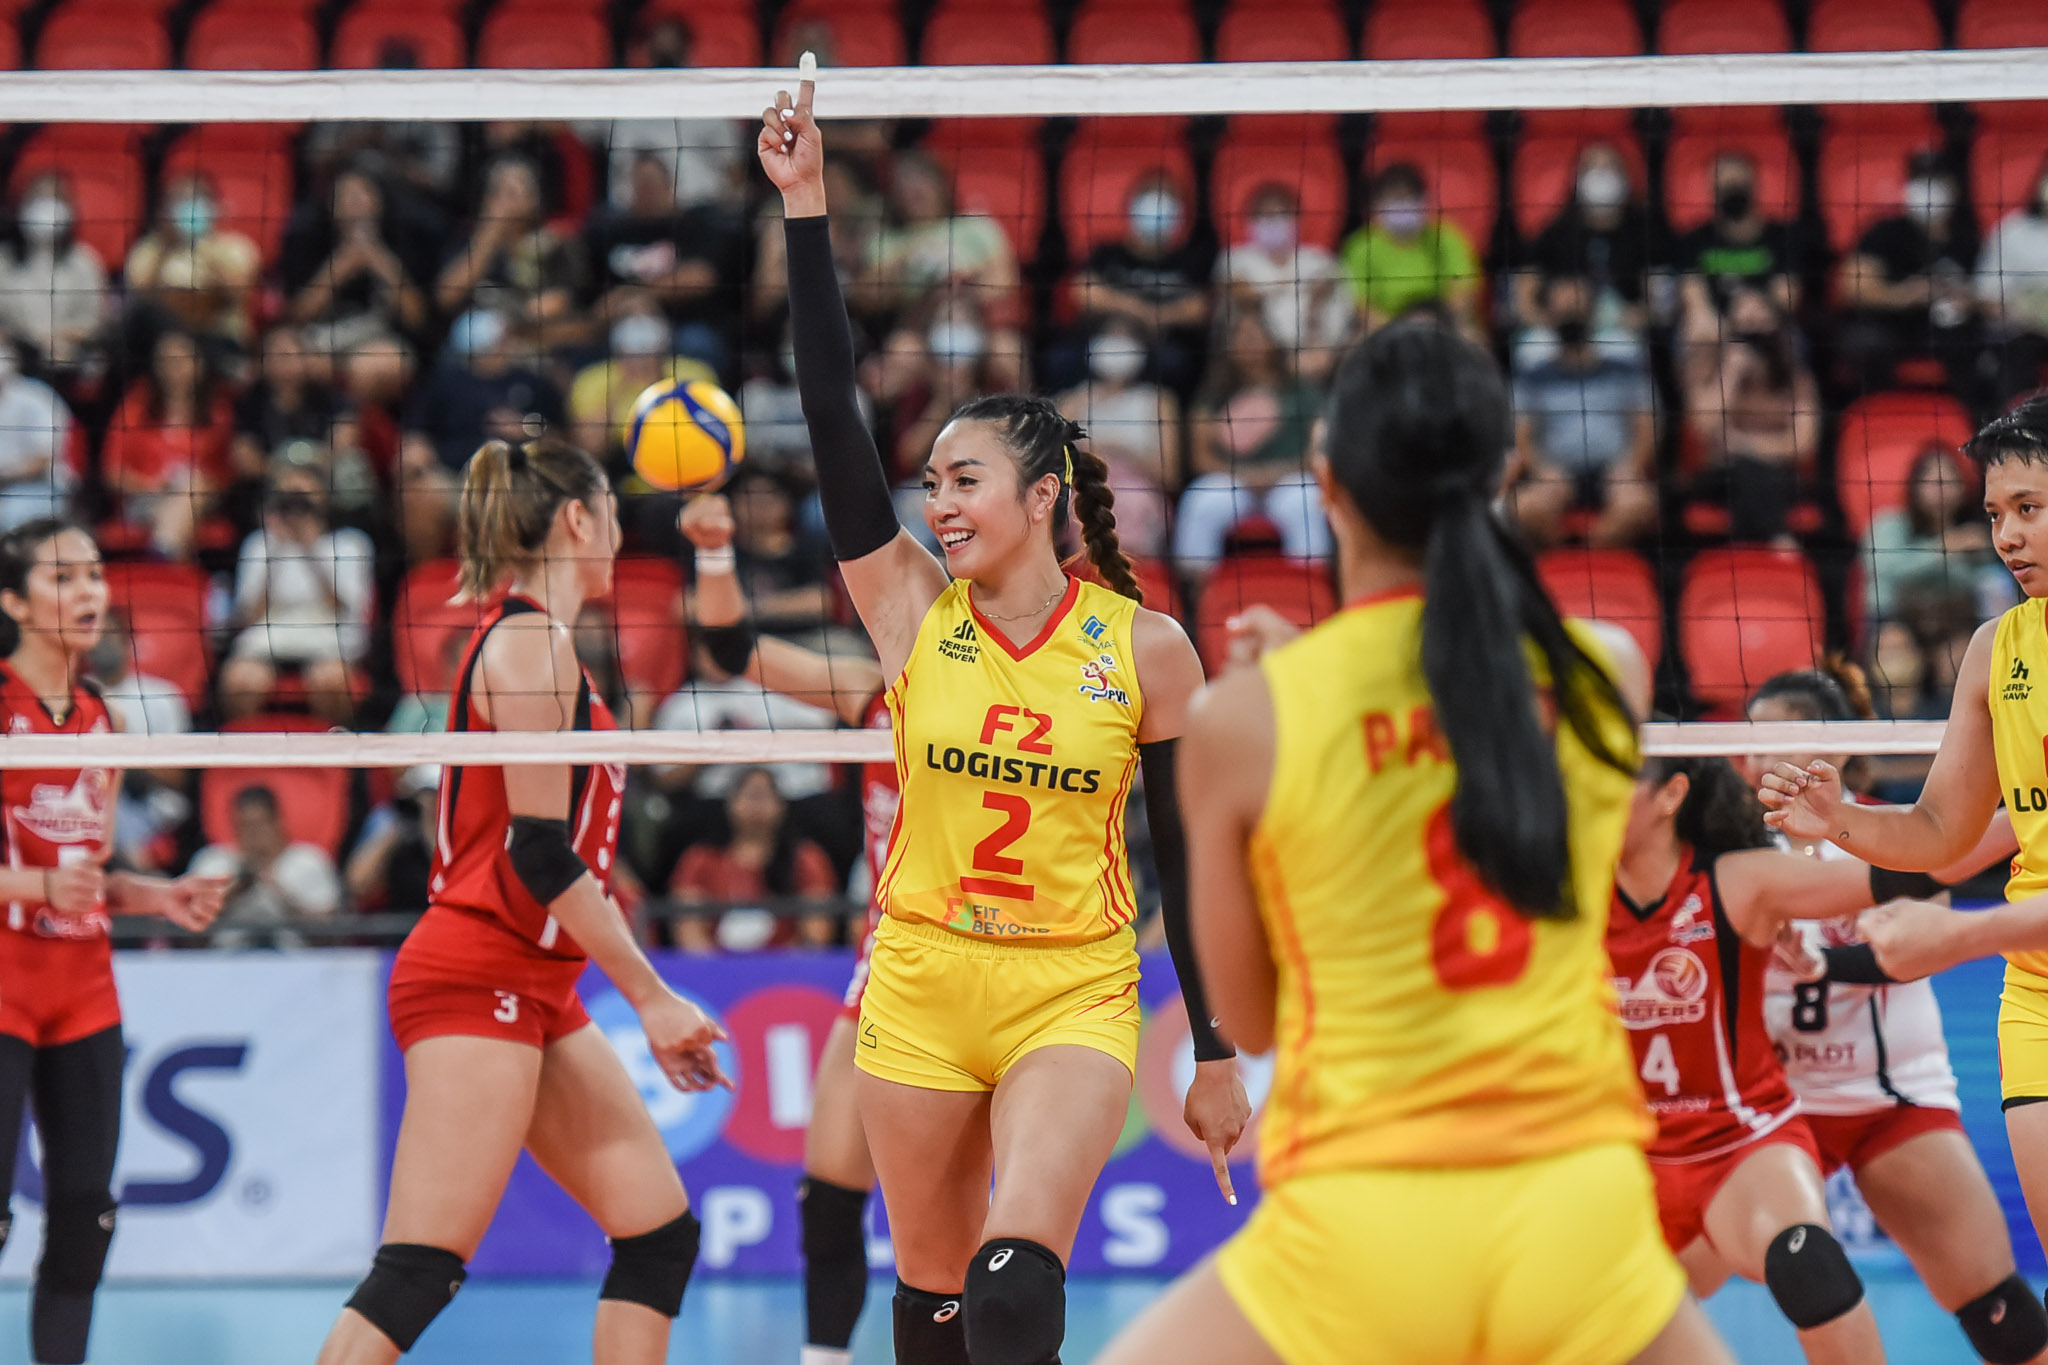 PVL-2023-PLDT-vs.-F2-Aby-Marano-9927 With first game out of the way, Diego braces for rest of PVL field News PVL Volleyball  - philippine sports news